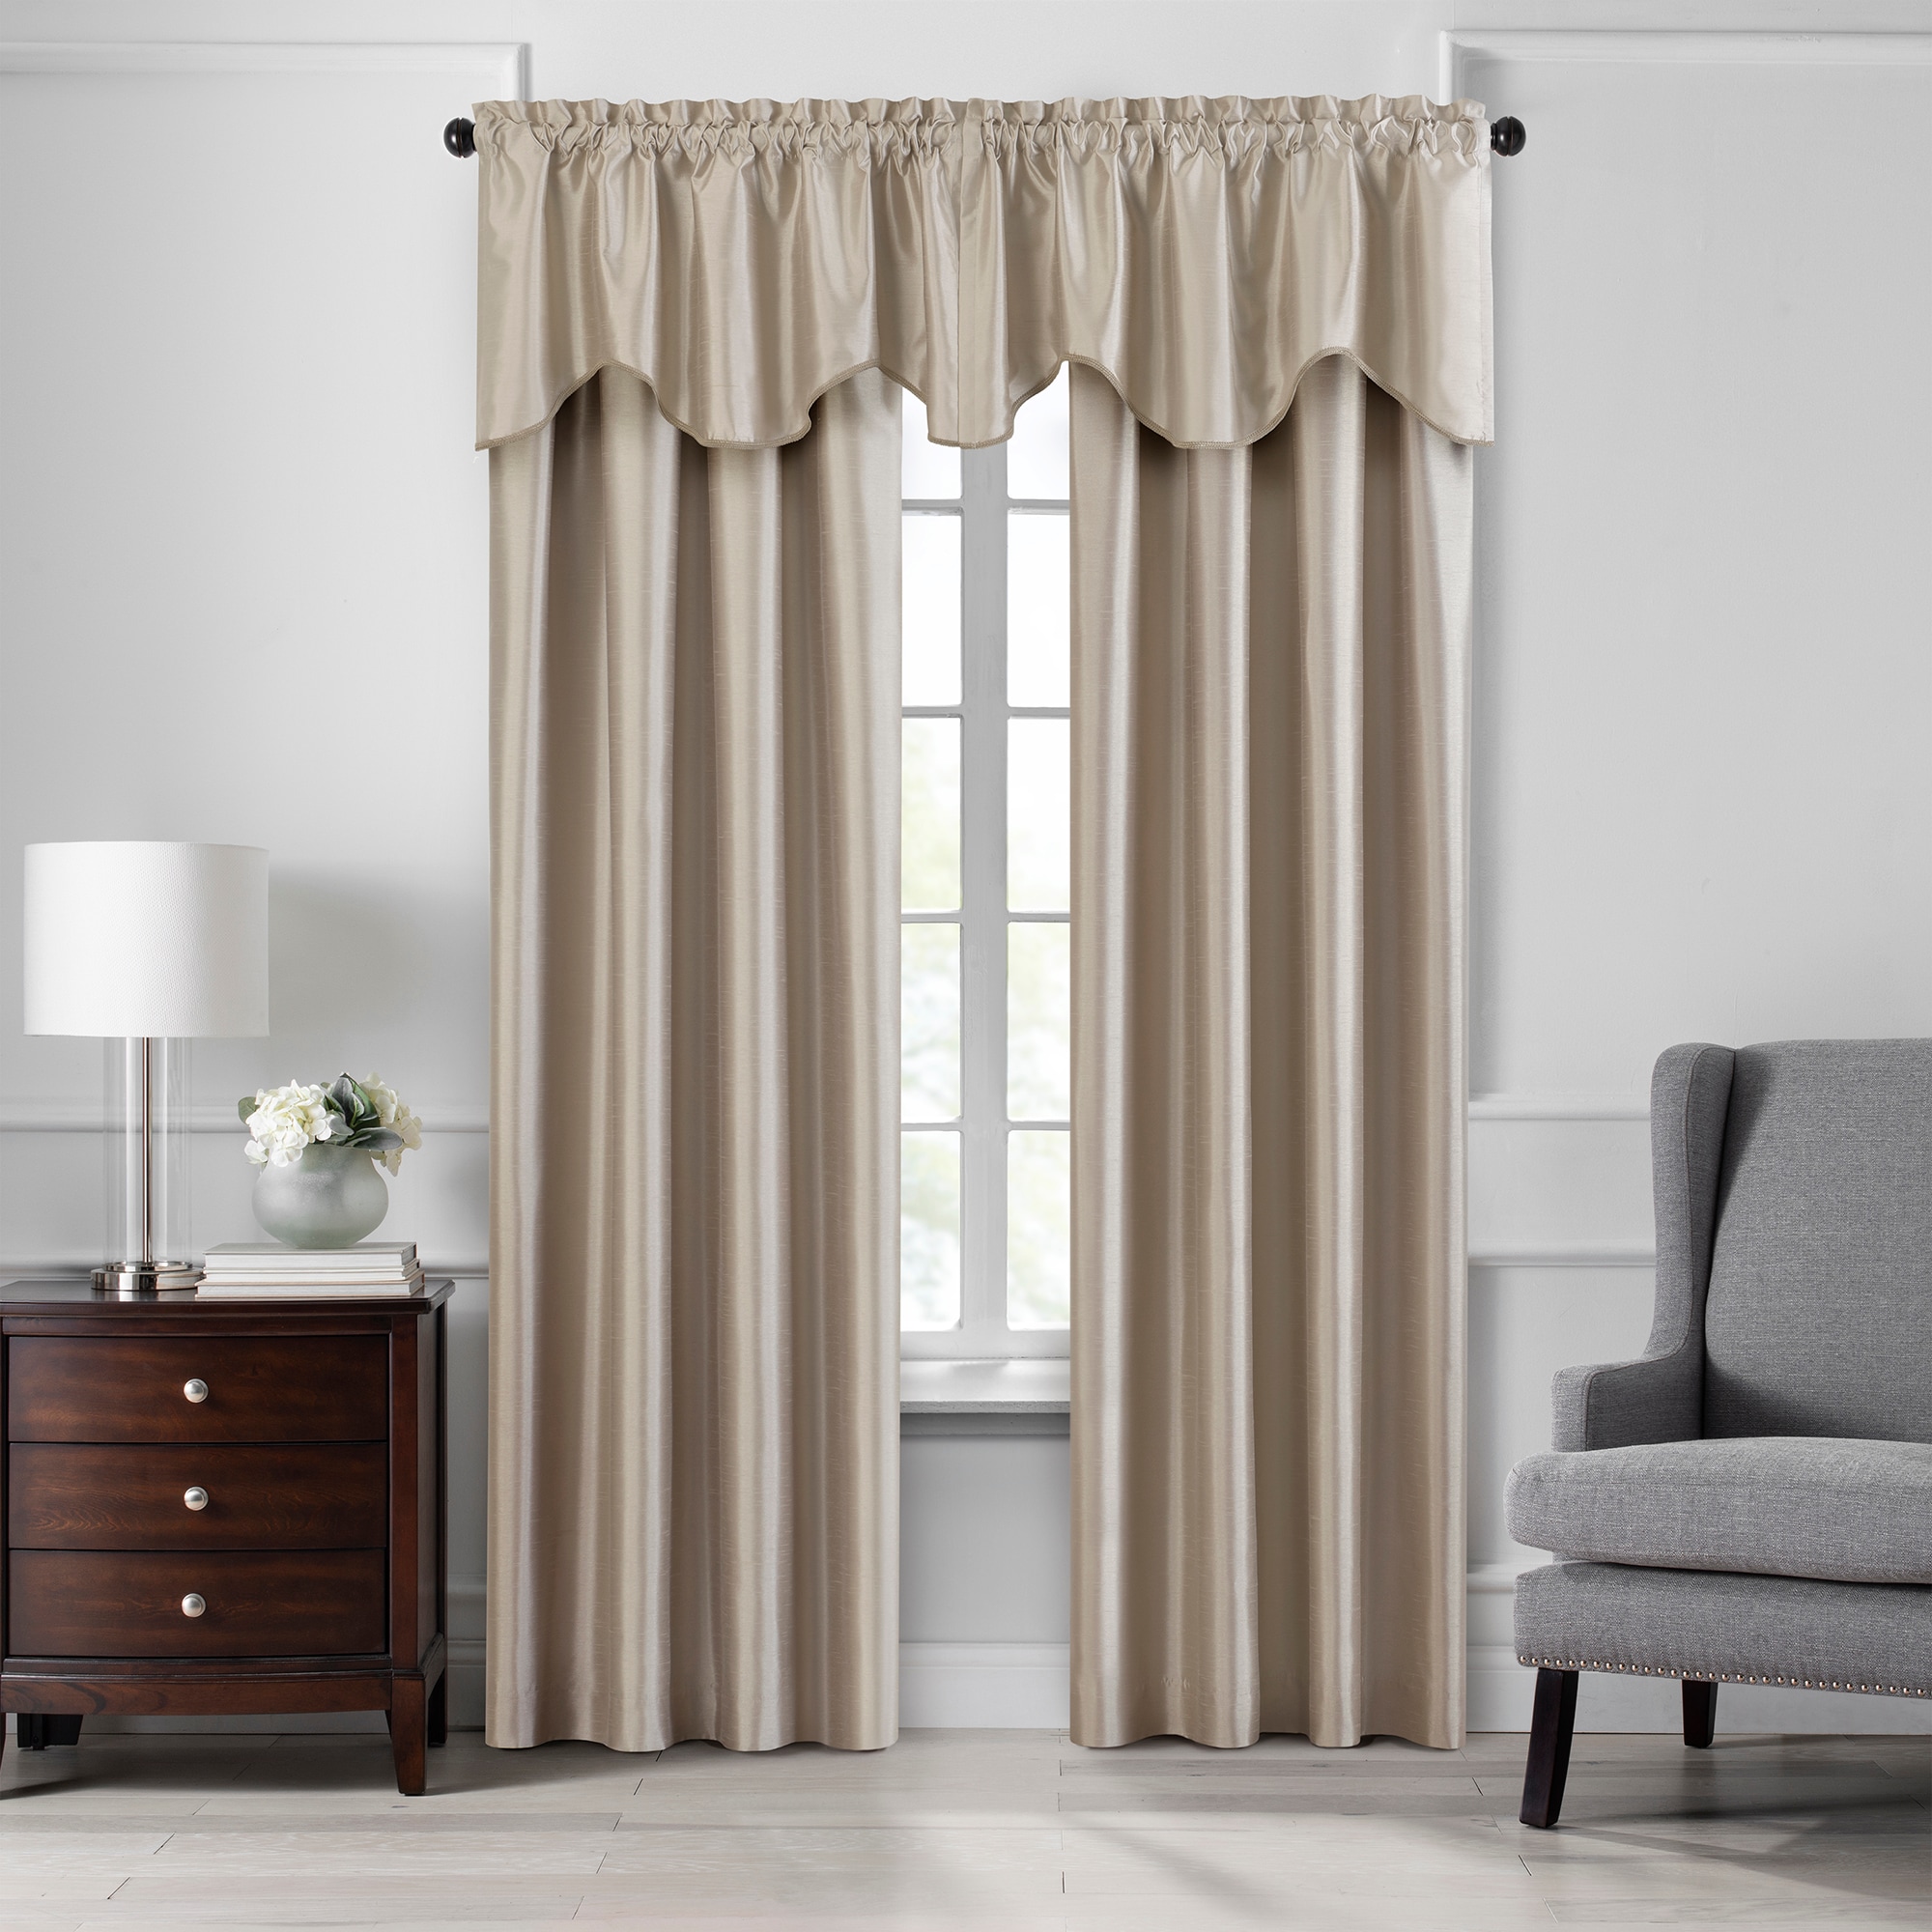 department Drapes Panel 95-in Rod Elrene Lined Fashions Single Curtains Curtain in Standard at Home Taupe Pocket Blackout & the